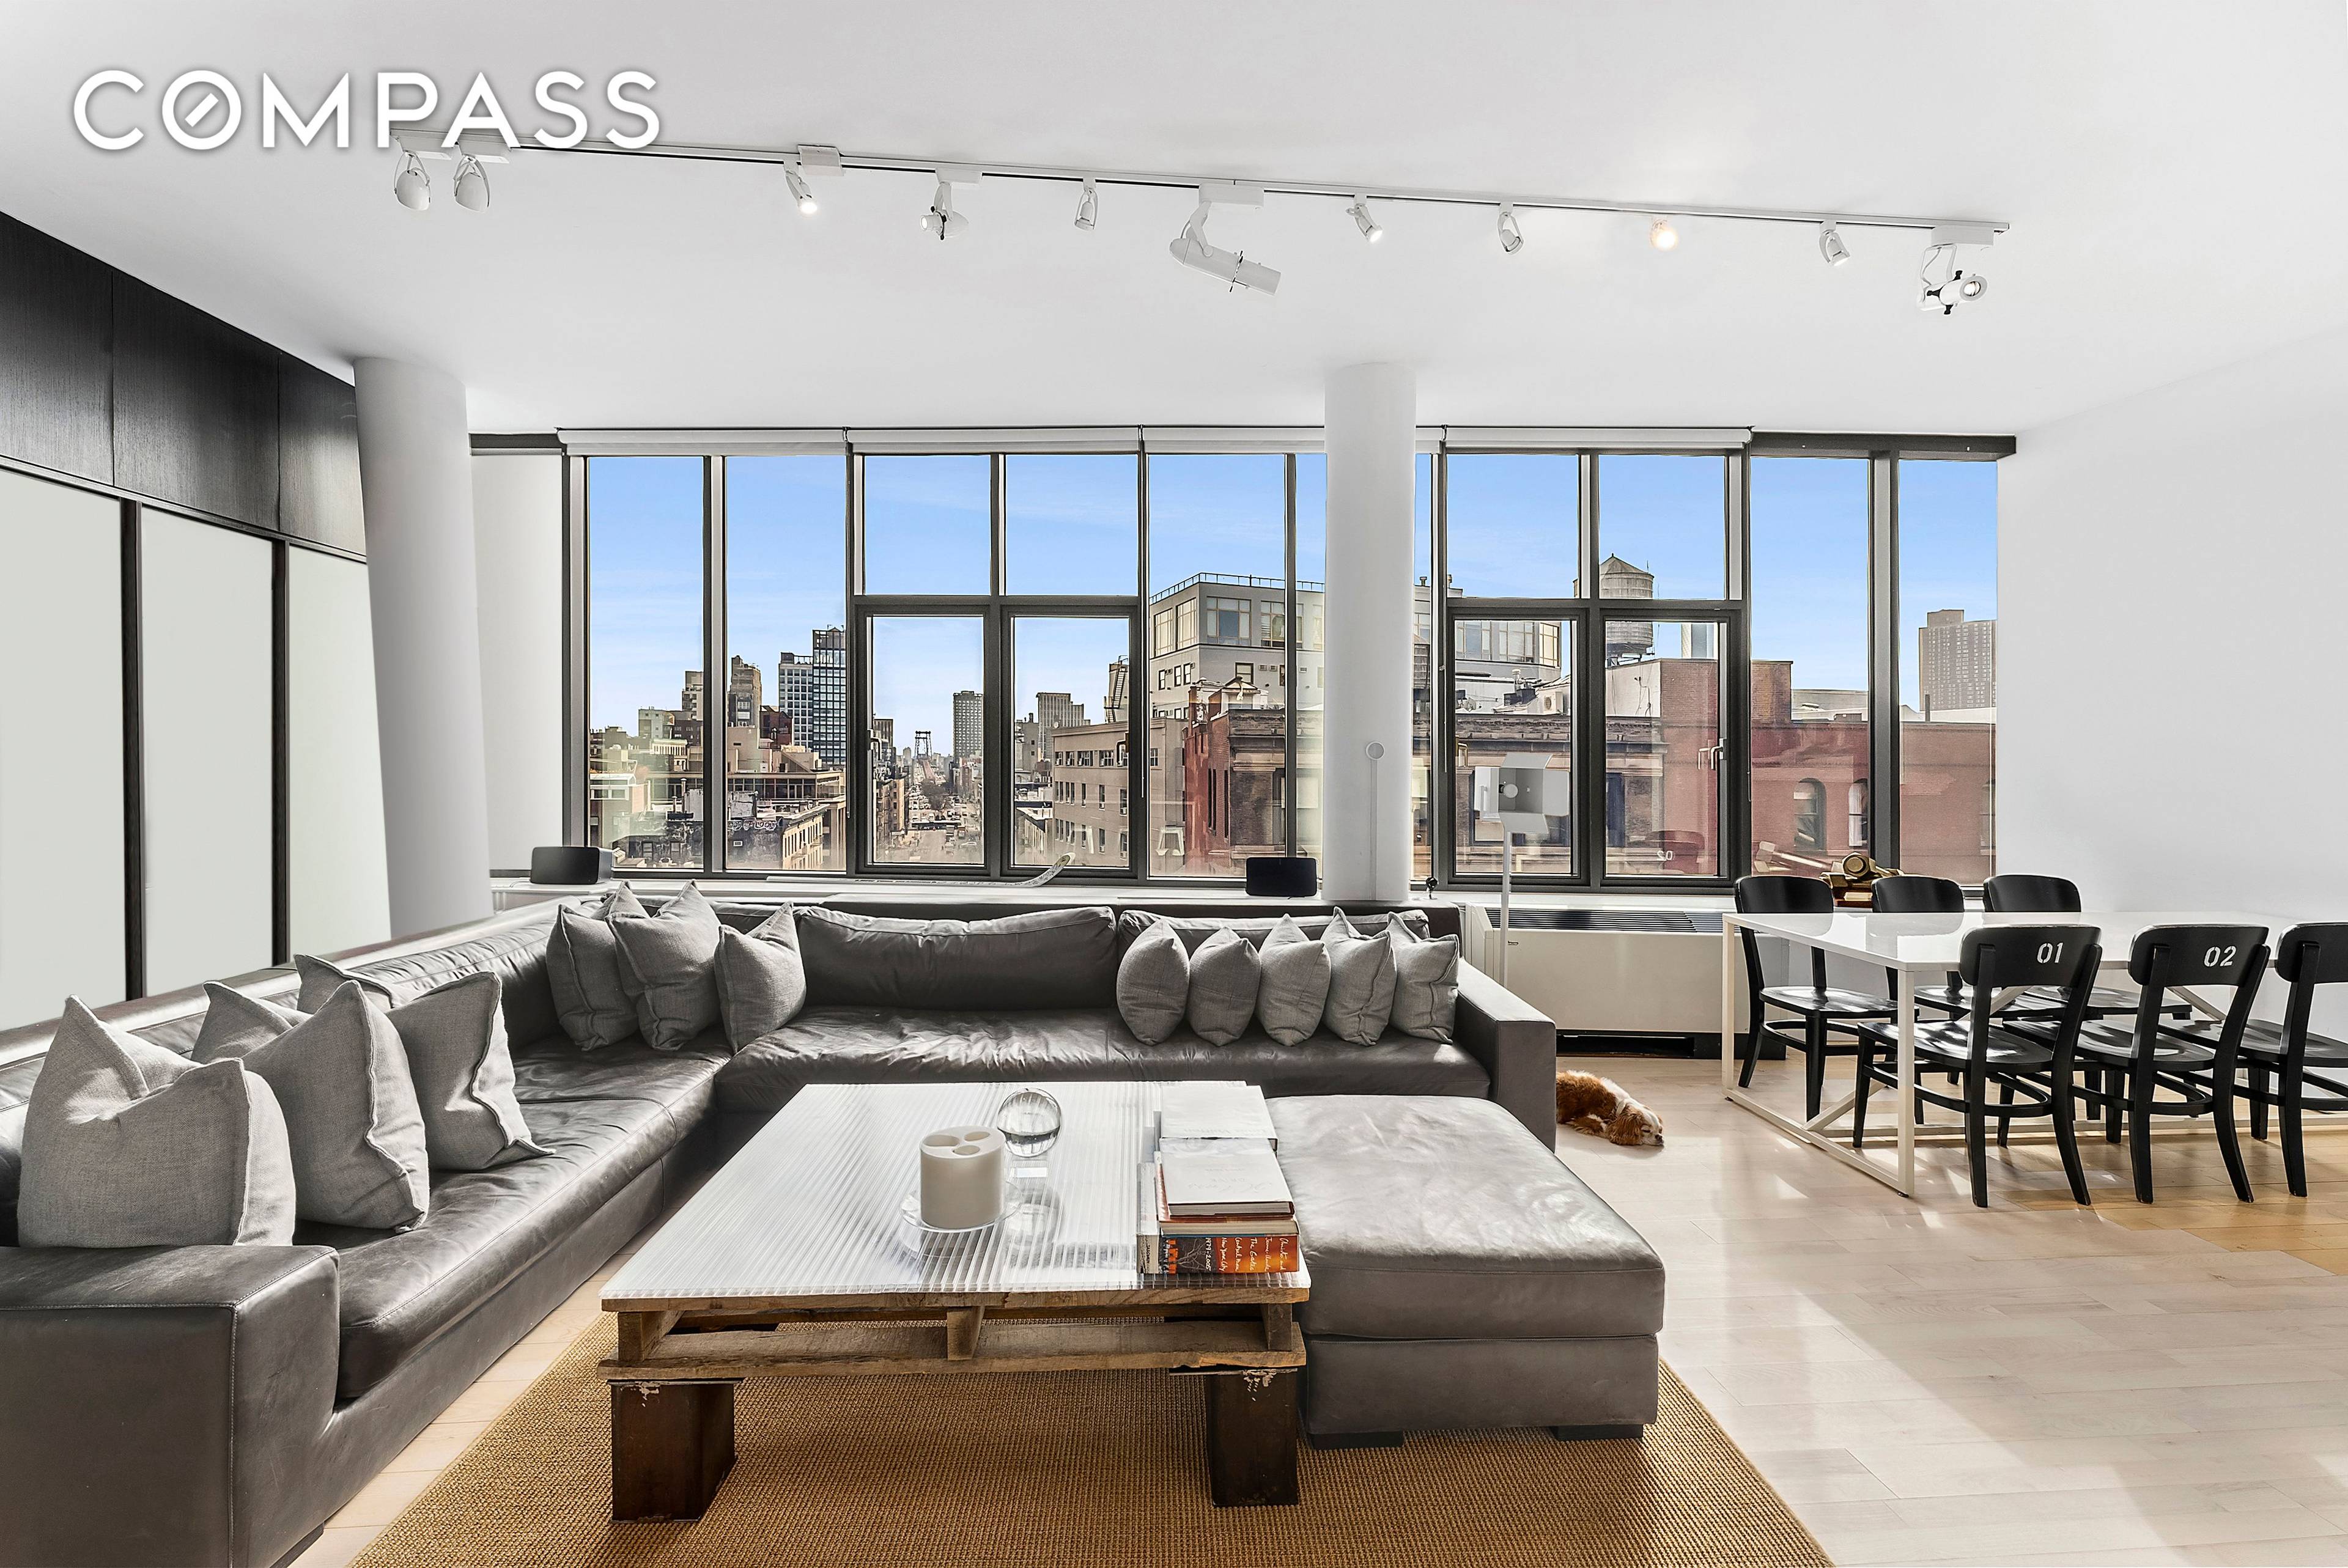 Breathtaking open sky, city and bridge views become your daily backdrop in this stunning four bedroom plus home office, three bathroom designer condominium featuring a flexible floor plan in SoHo's ...